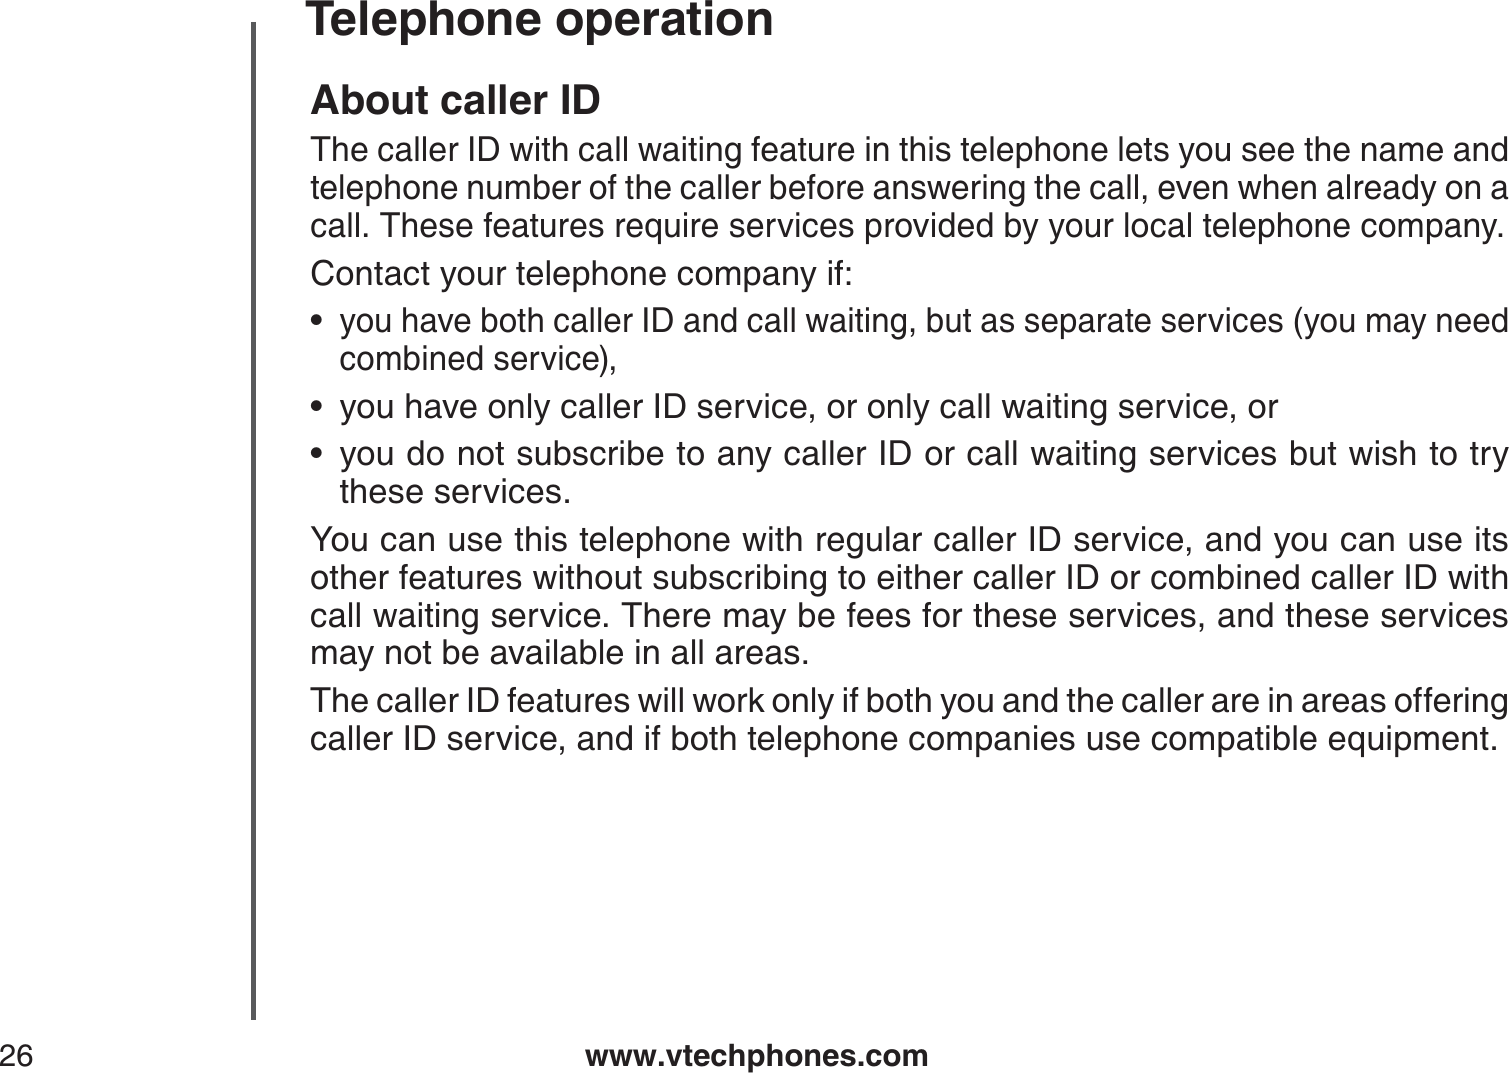 www.vtechphones.com26Telephone operationAbout caller IDThe caller ID with call waiting feature in this telephone lets you see the name and telephone number of the caller before answering the call, even when already on a call. These features require services provided by your local telephone company.Contact your telephone company if:you have both caller ID and call waiting, but as separate services (you may need combined service),you have only caller ID service, or only call waiting service, oryou do not subscribe to any caller ID or call waiting services but wish to try these services.You can use this telephone with regular caller ID service, and you can use its other features without subscribing to either caller ID or combined caller ID with call waiting service. There may be fees for these services, and these services may not be available in all areas.The caller ID features will work only if both you and the caller are in areas offeringcaller ID service, and if both telephone companies use compatible equipment.•••